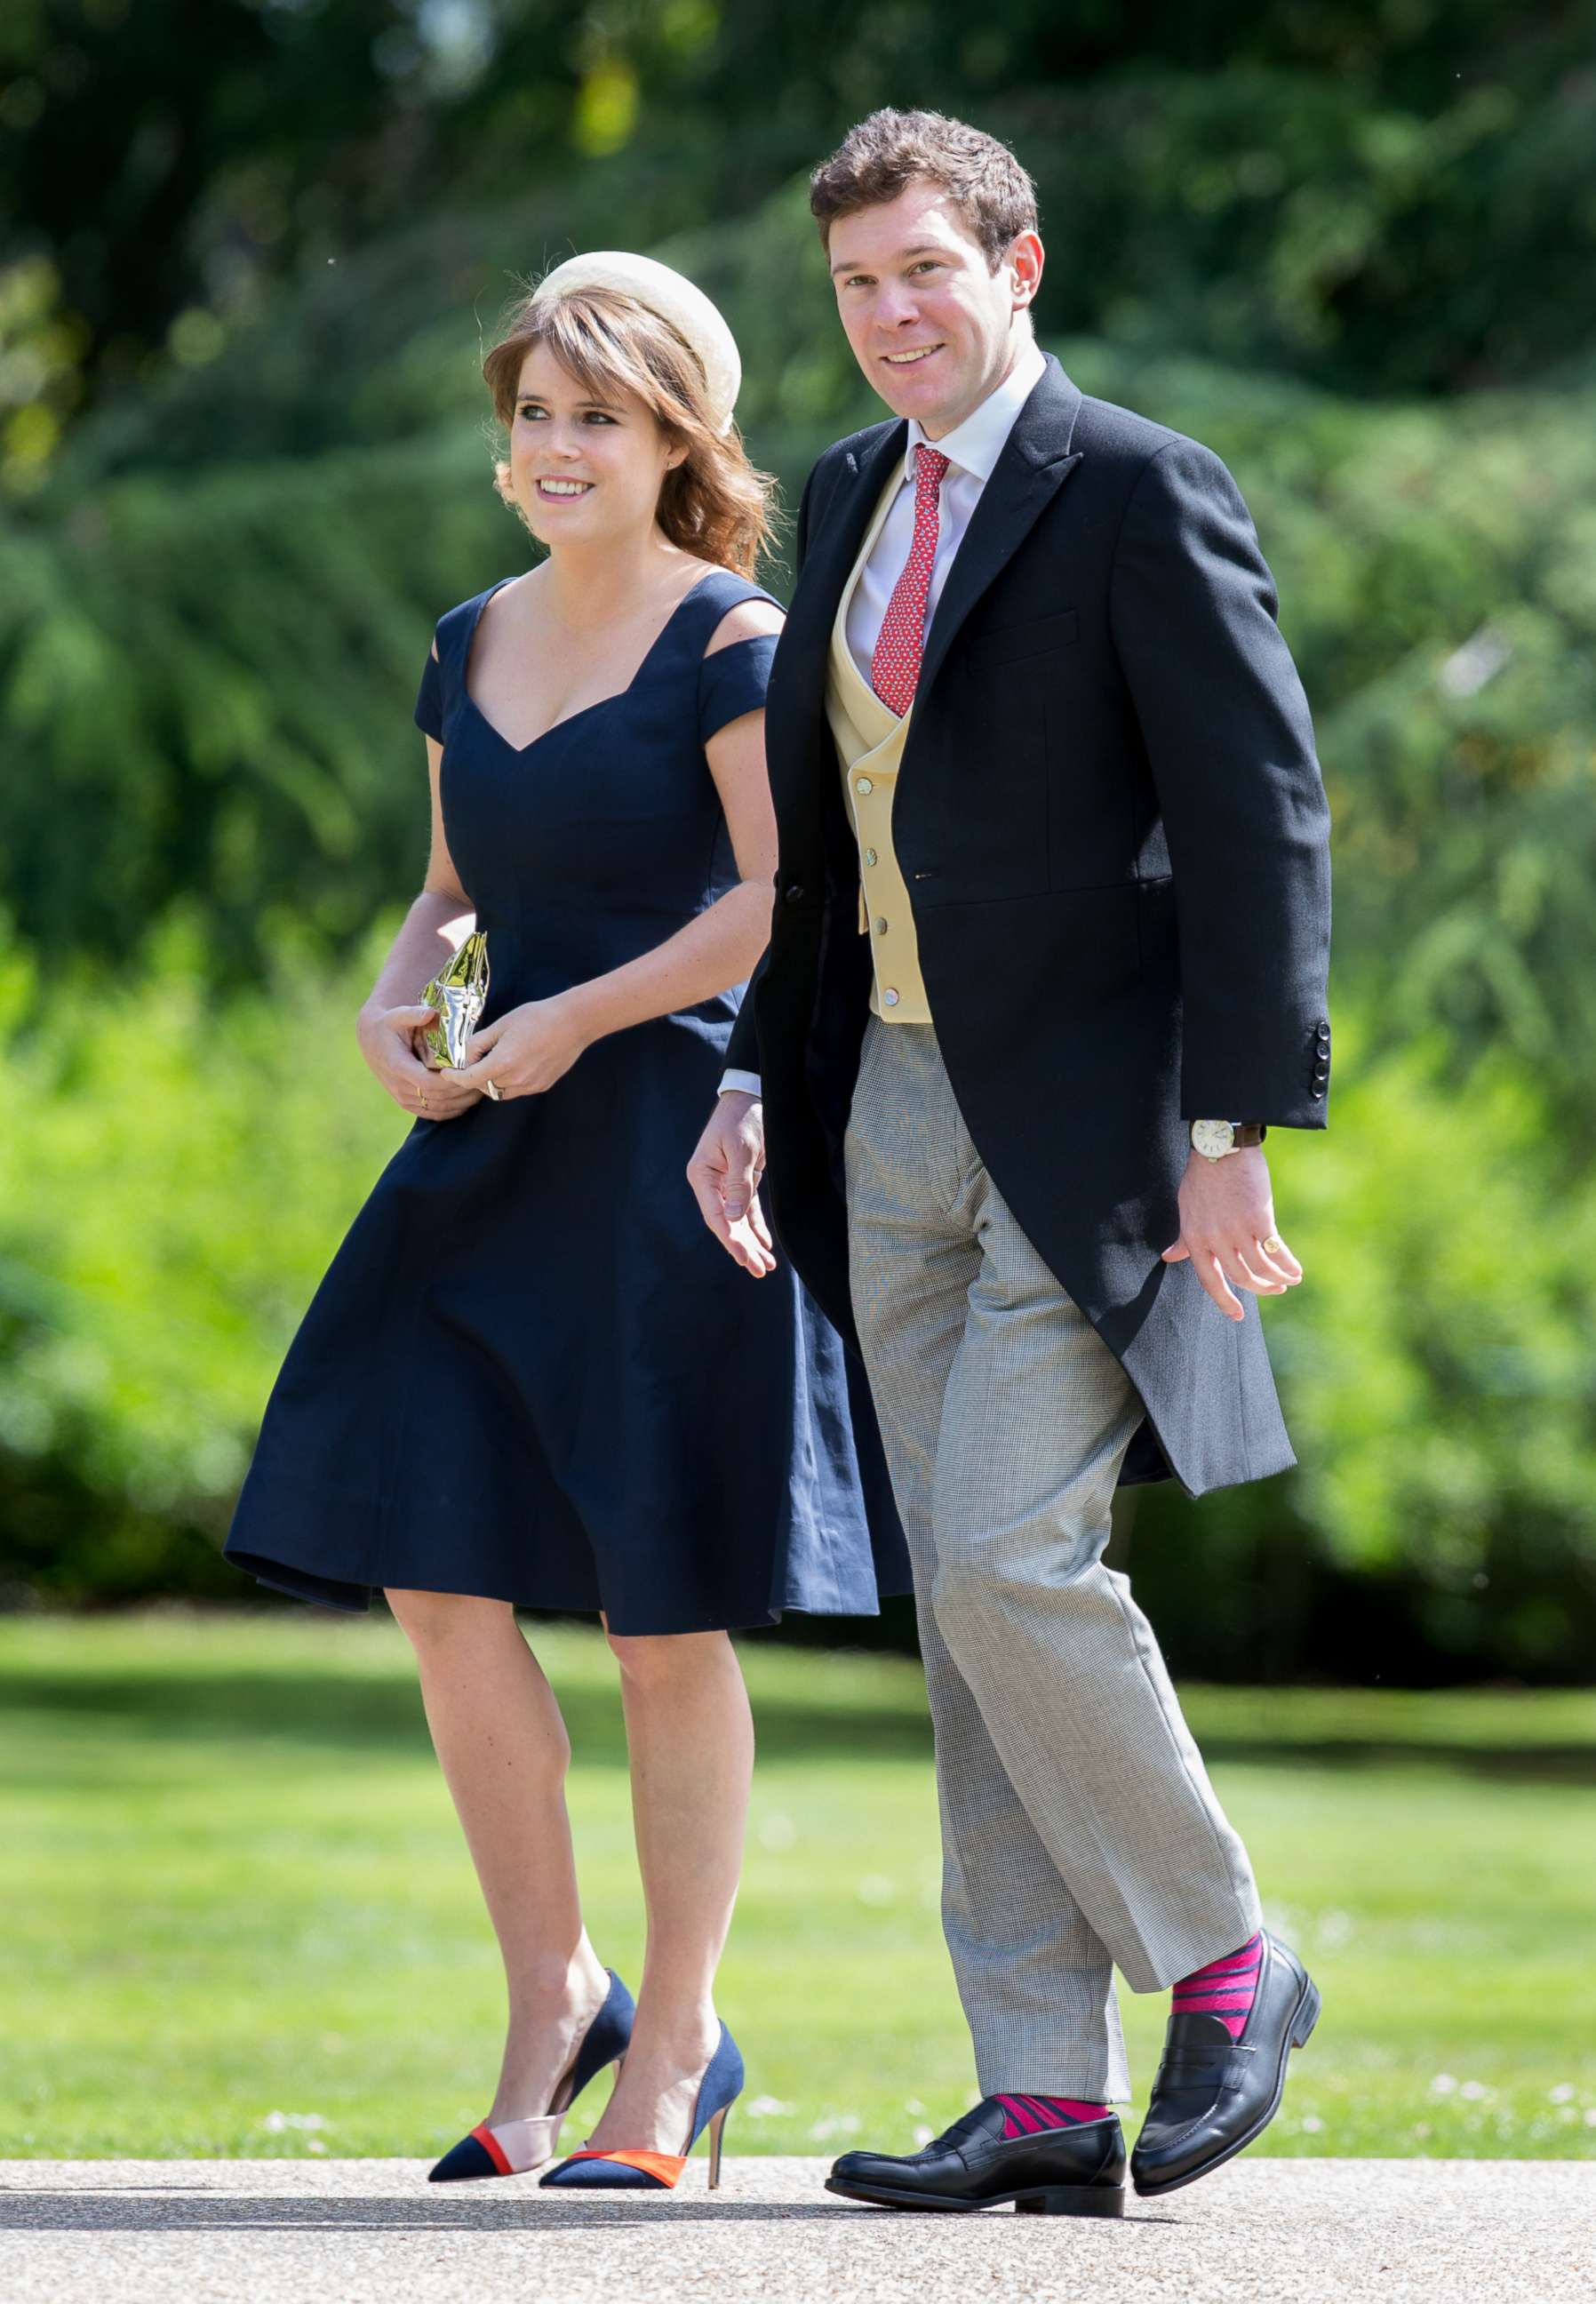 PHOTO: Princess Eugenie and Jack Brooksbank arrive at the wedding of James Matthews and Pippa Middleton, St Mark's Church, May 20, 2017, in Englefield, U.K.